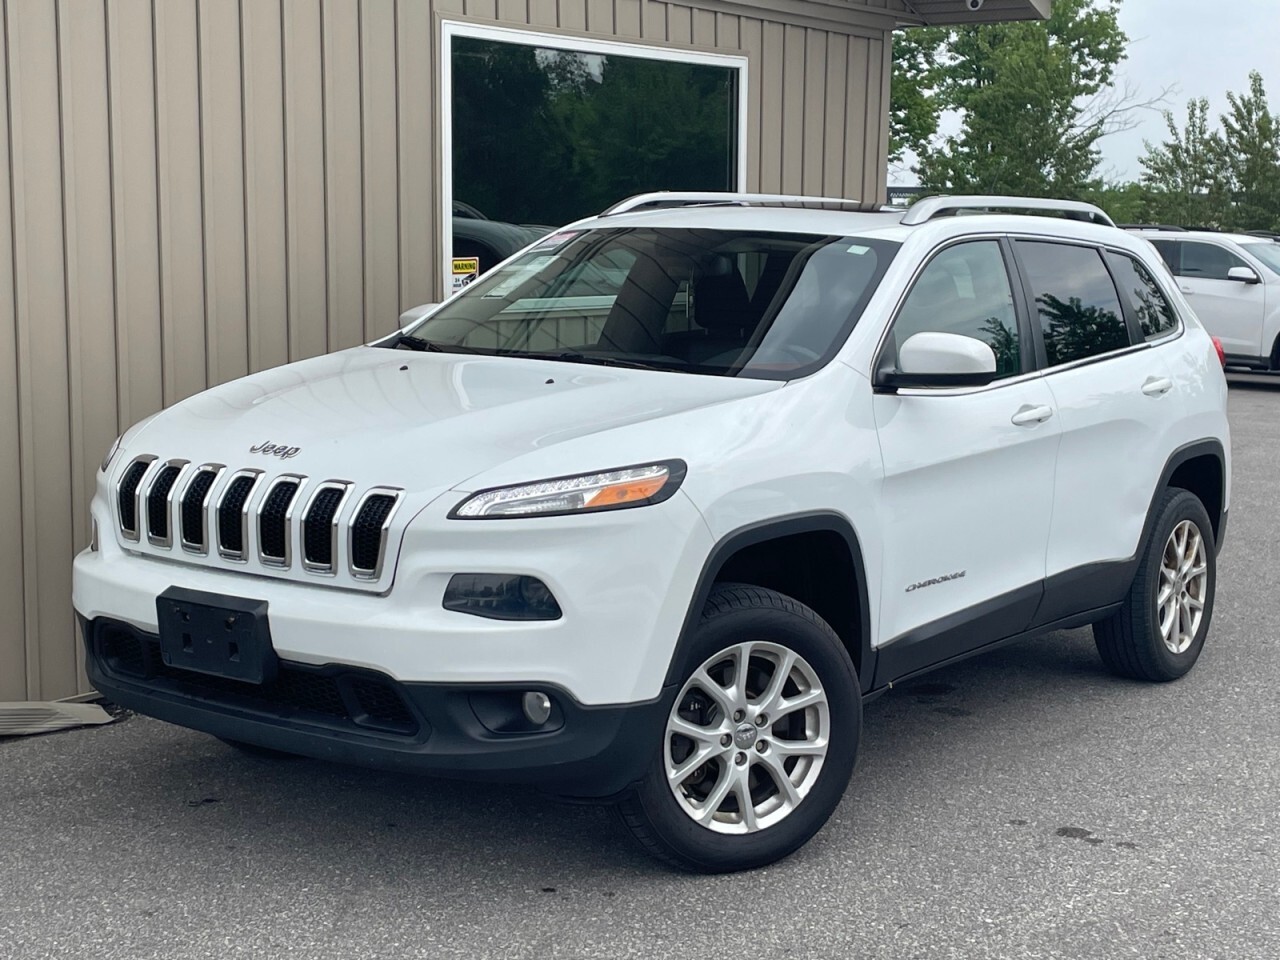 2014 Jeep Cherokee FWD 4dr North